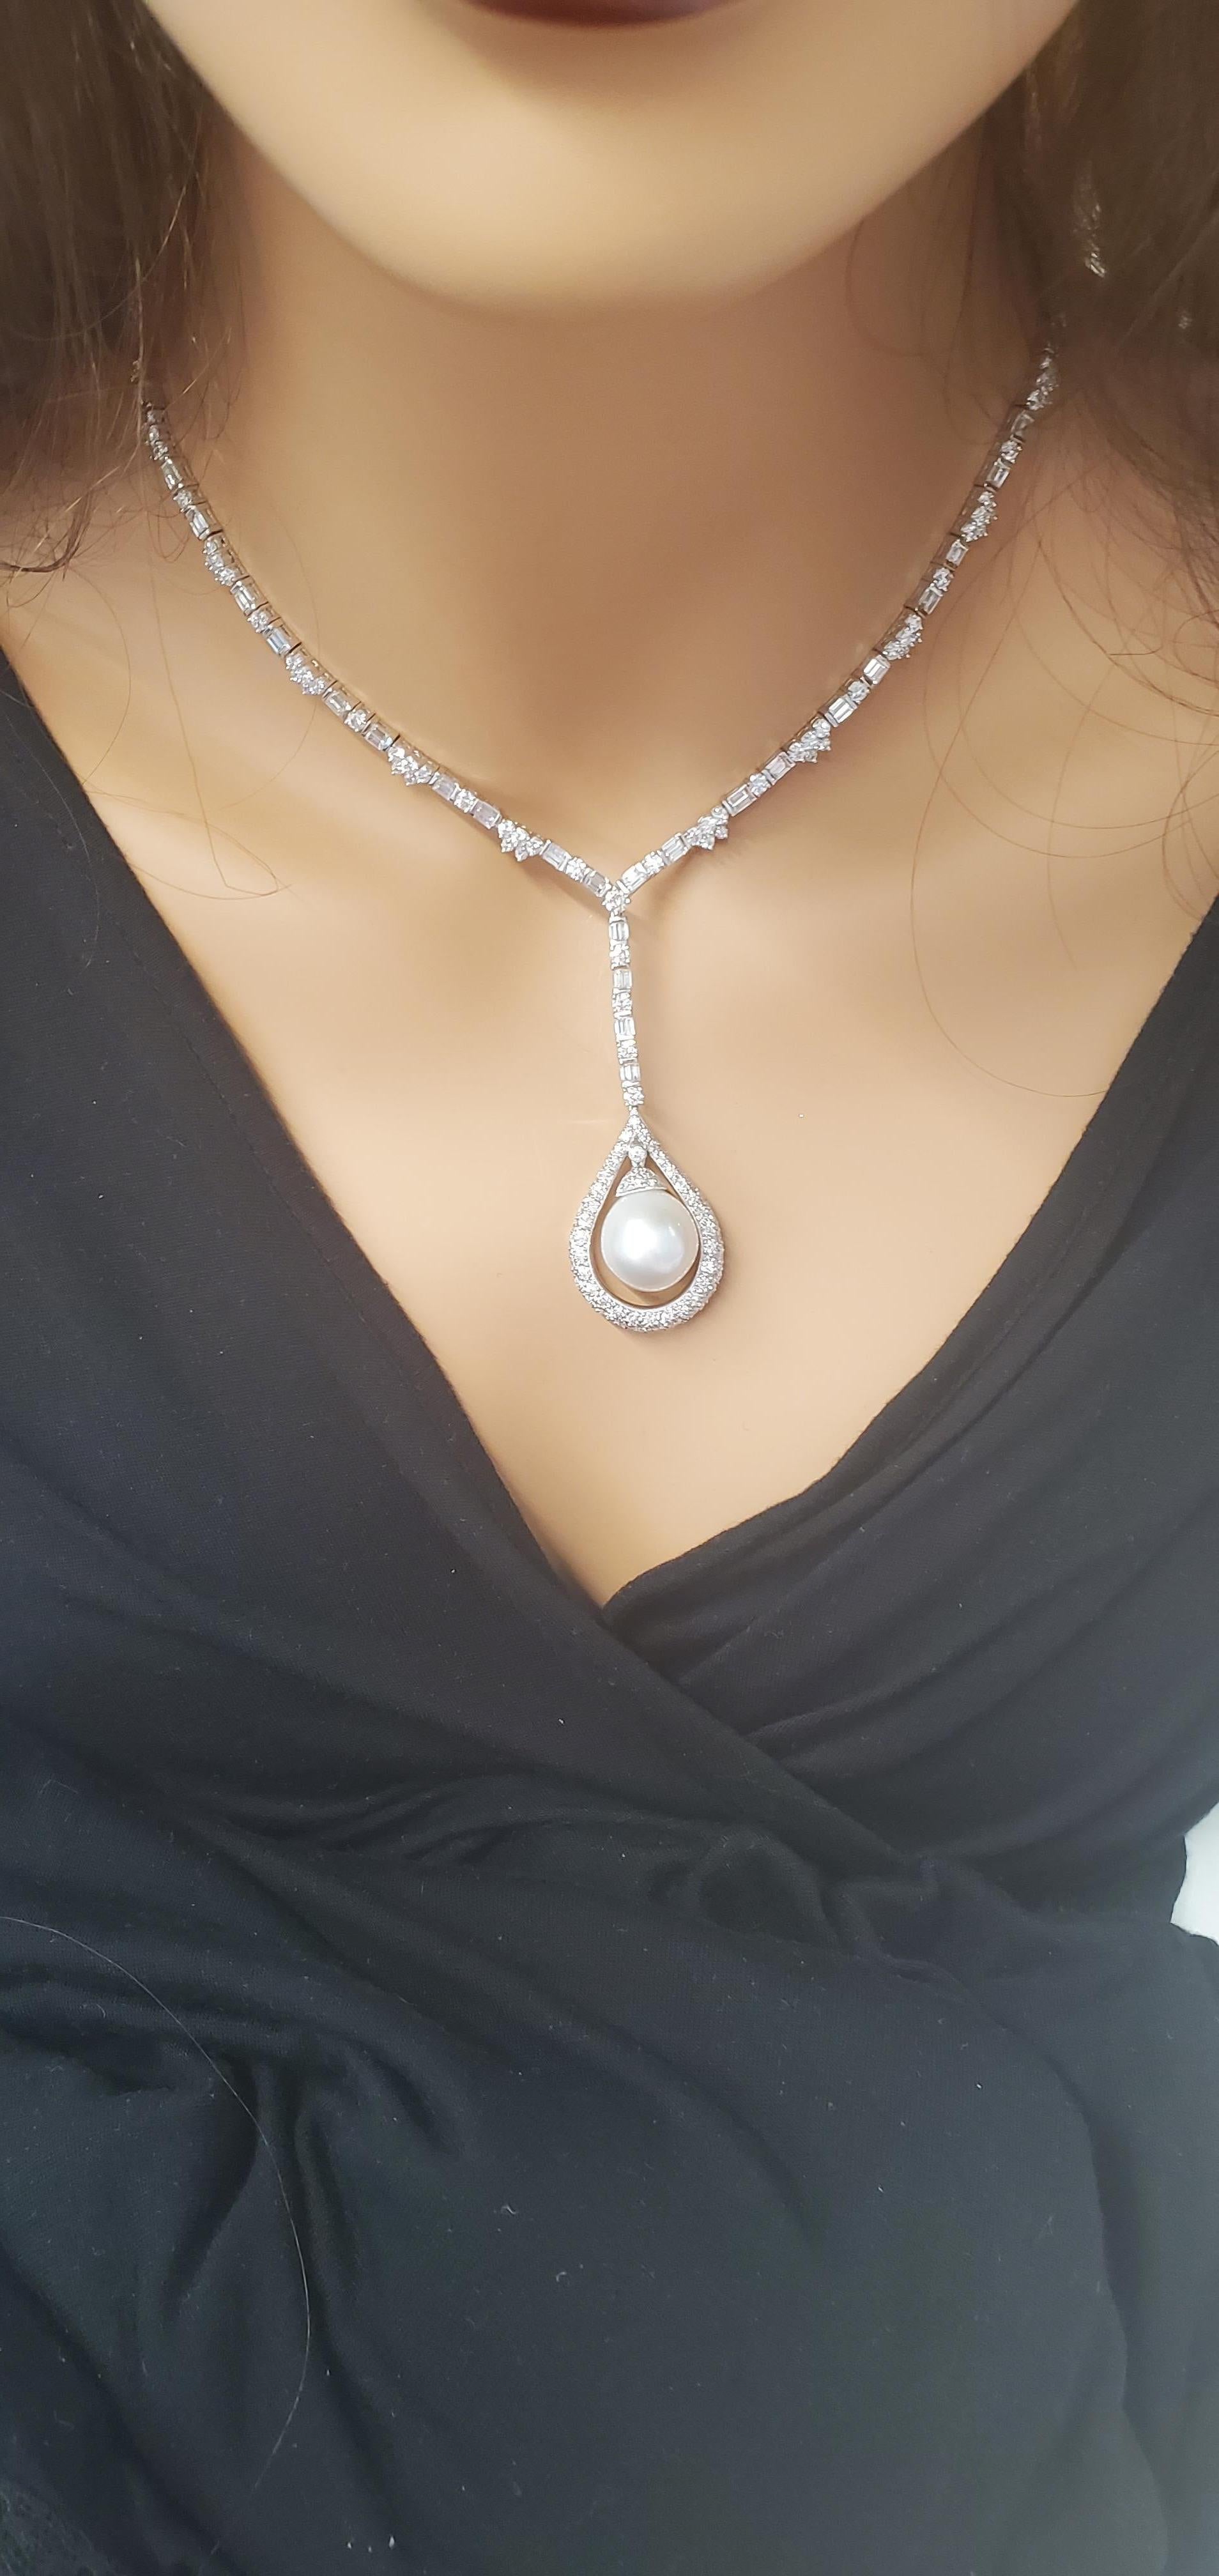 Nothing says elegance like the shimmering beauty of pearls! This gorgeous, brightly polished 18k white gold necklace features a white cultured pearl in the center, showcasing a high luster and pastel overtones complemented by a total of 241 round